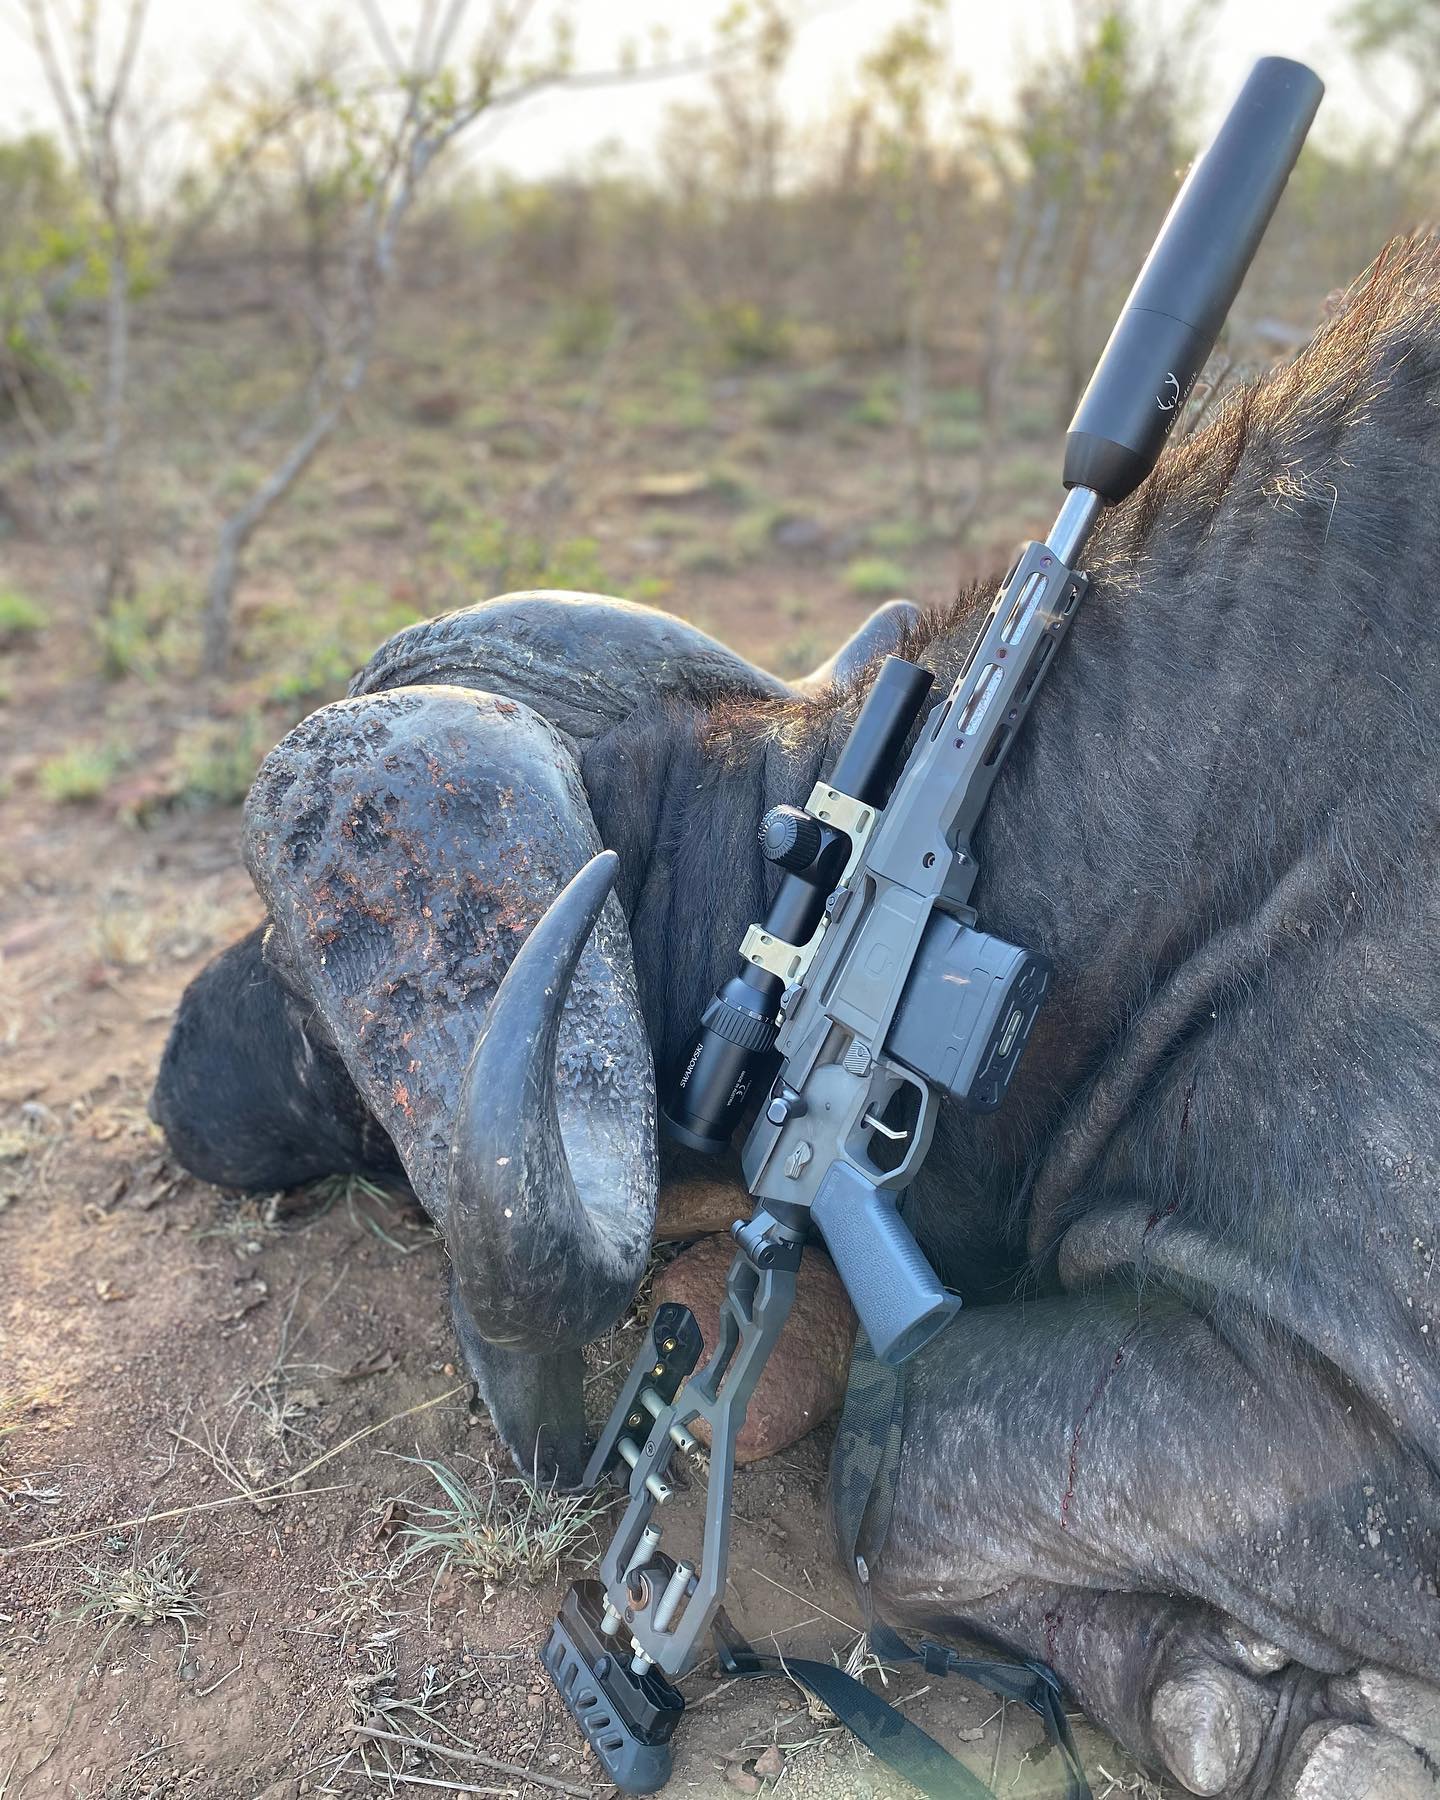 8.6 Blackout: Could It Be Your Next Whitetail Cartridge (or Cape Buffalo Load)?